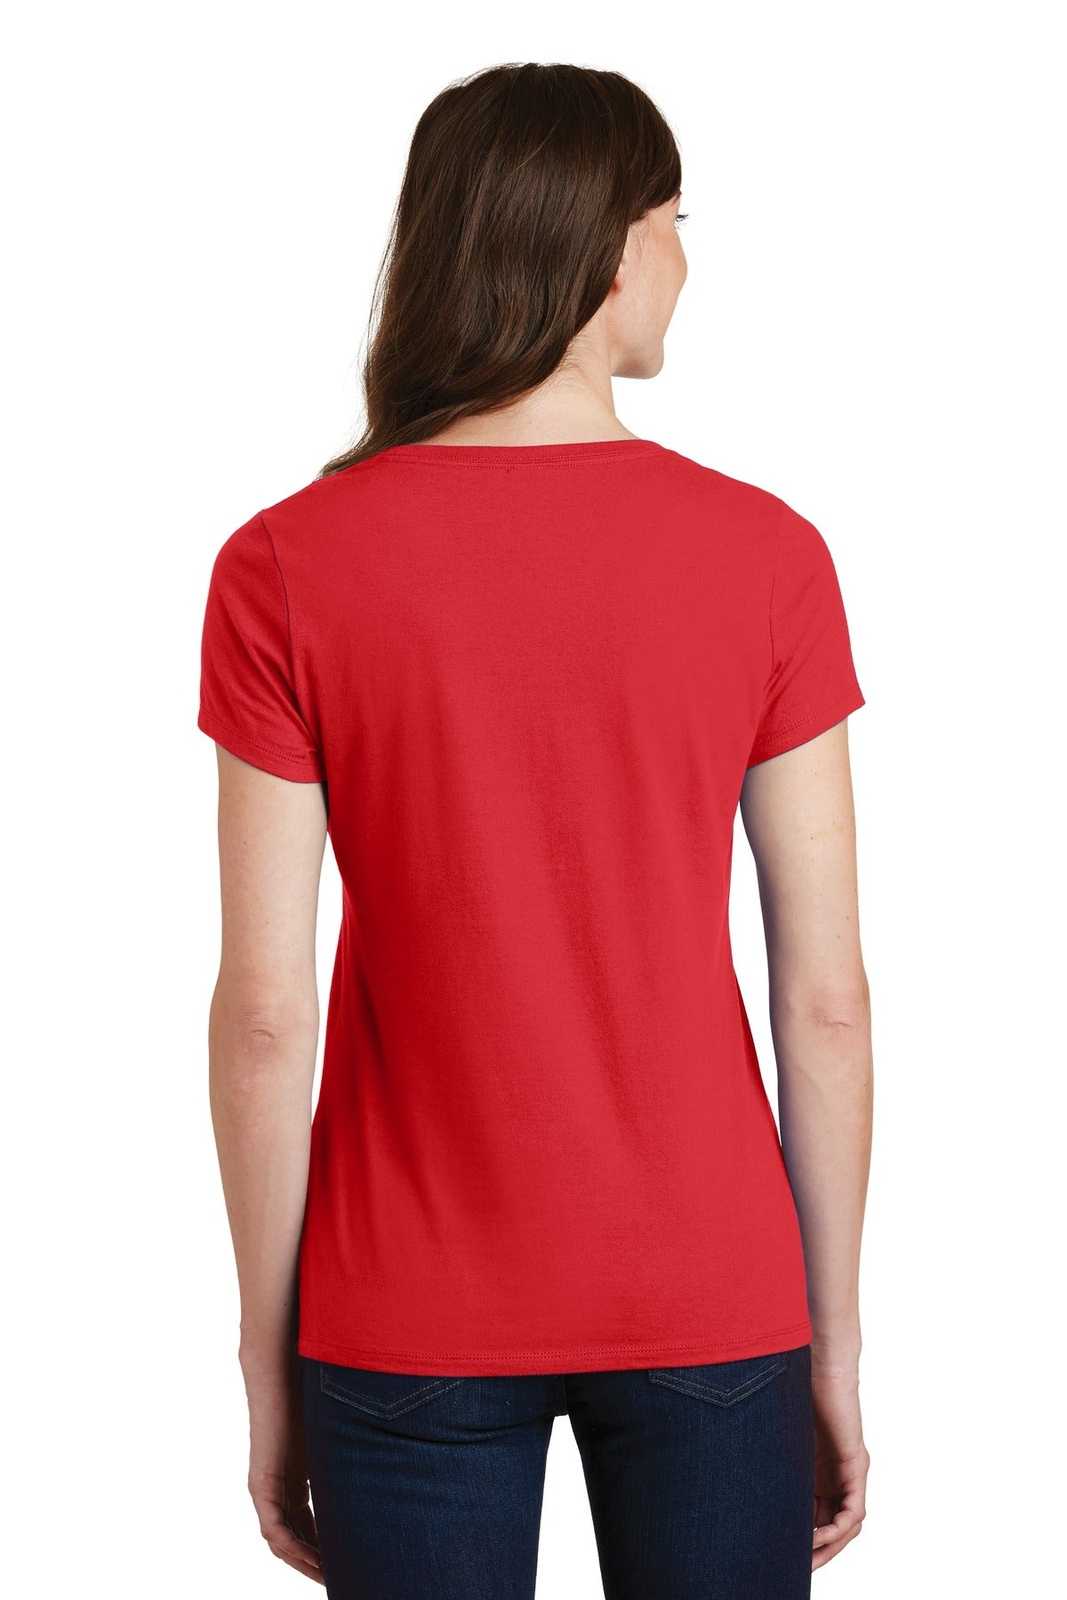 Port &amp; Company LPC450V Ladies Fan Favorite V-Neck Tee - Bright Red - HIT a Double - 2